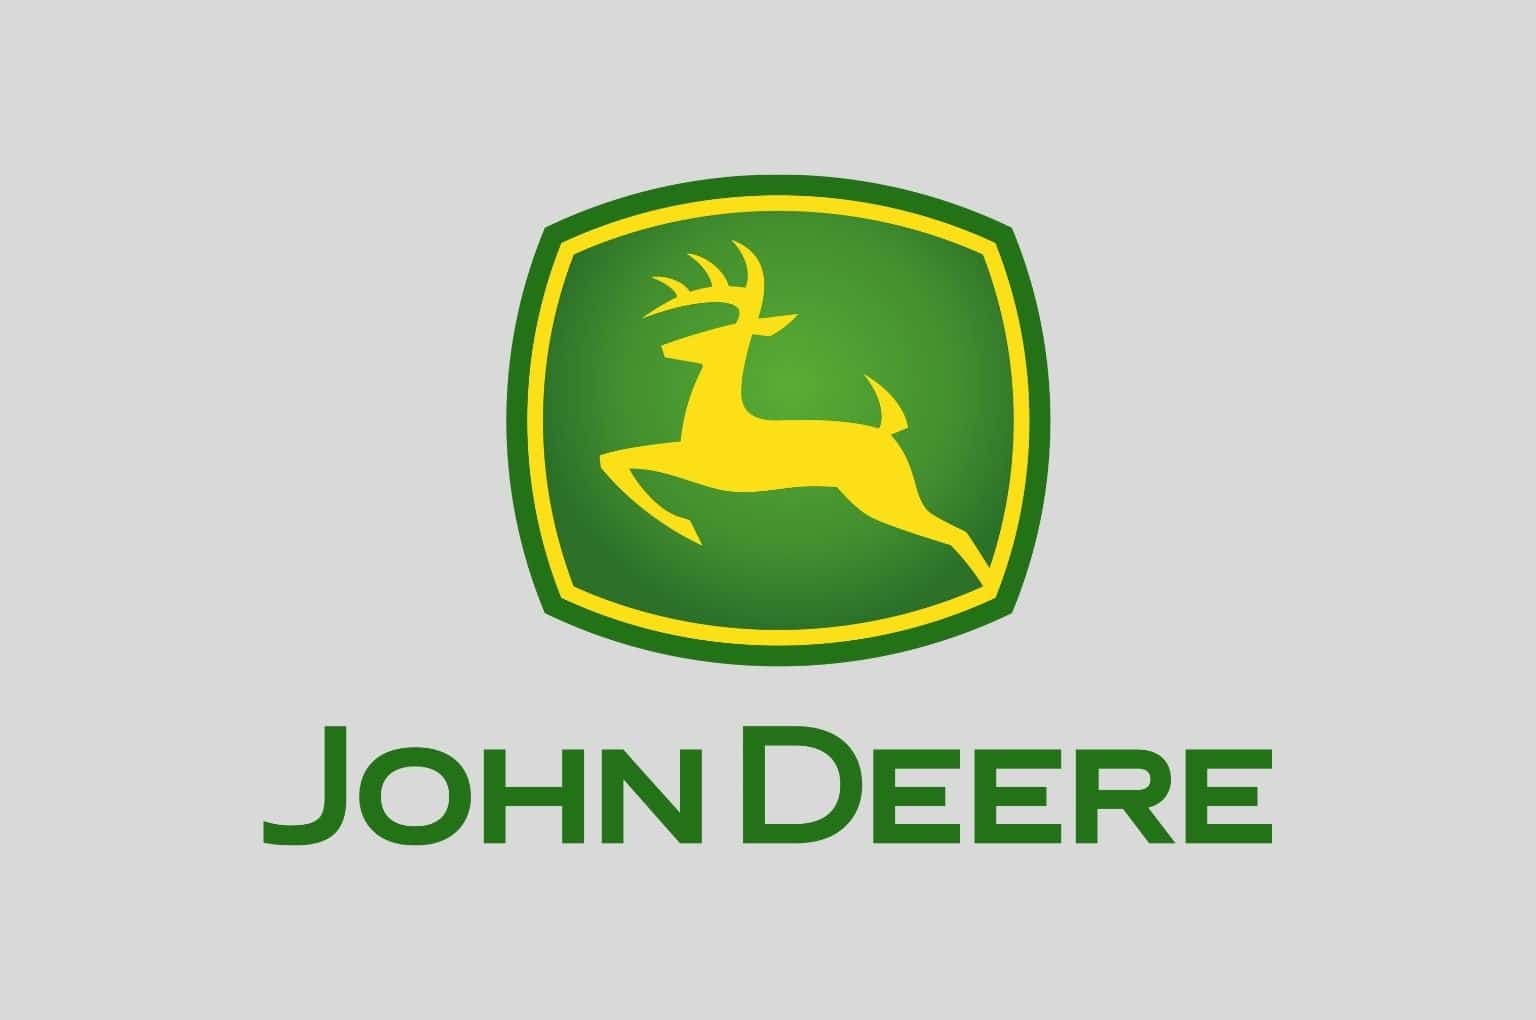 Deere reports positive Q2 results